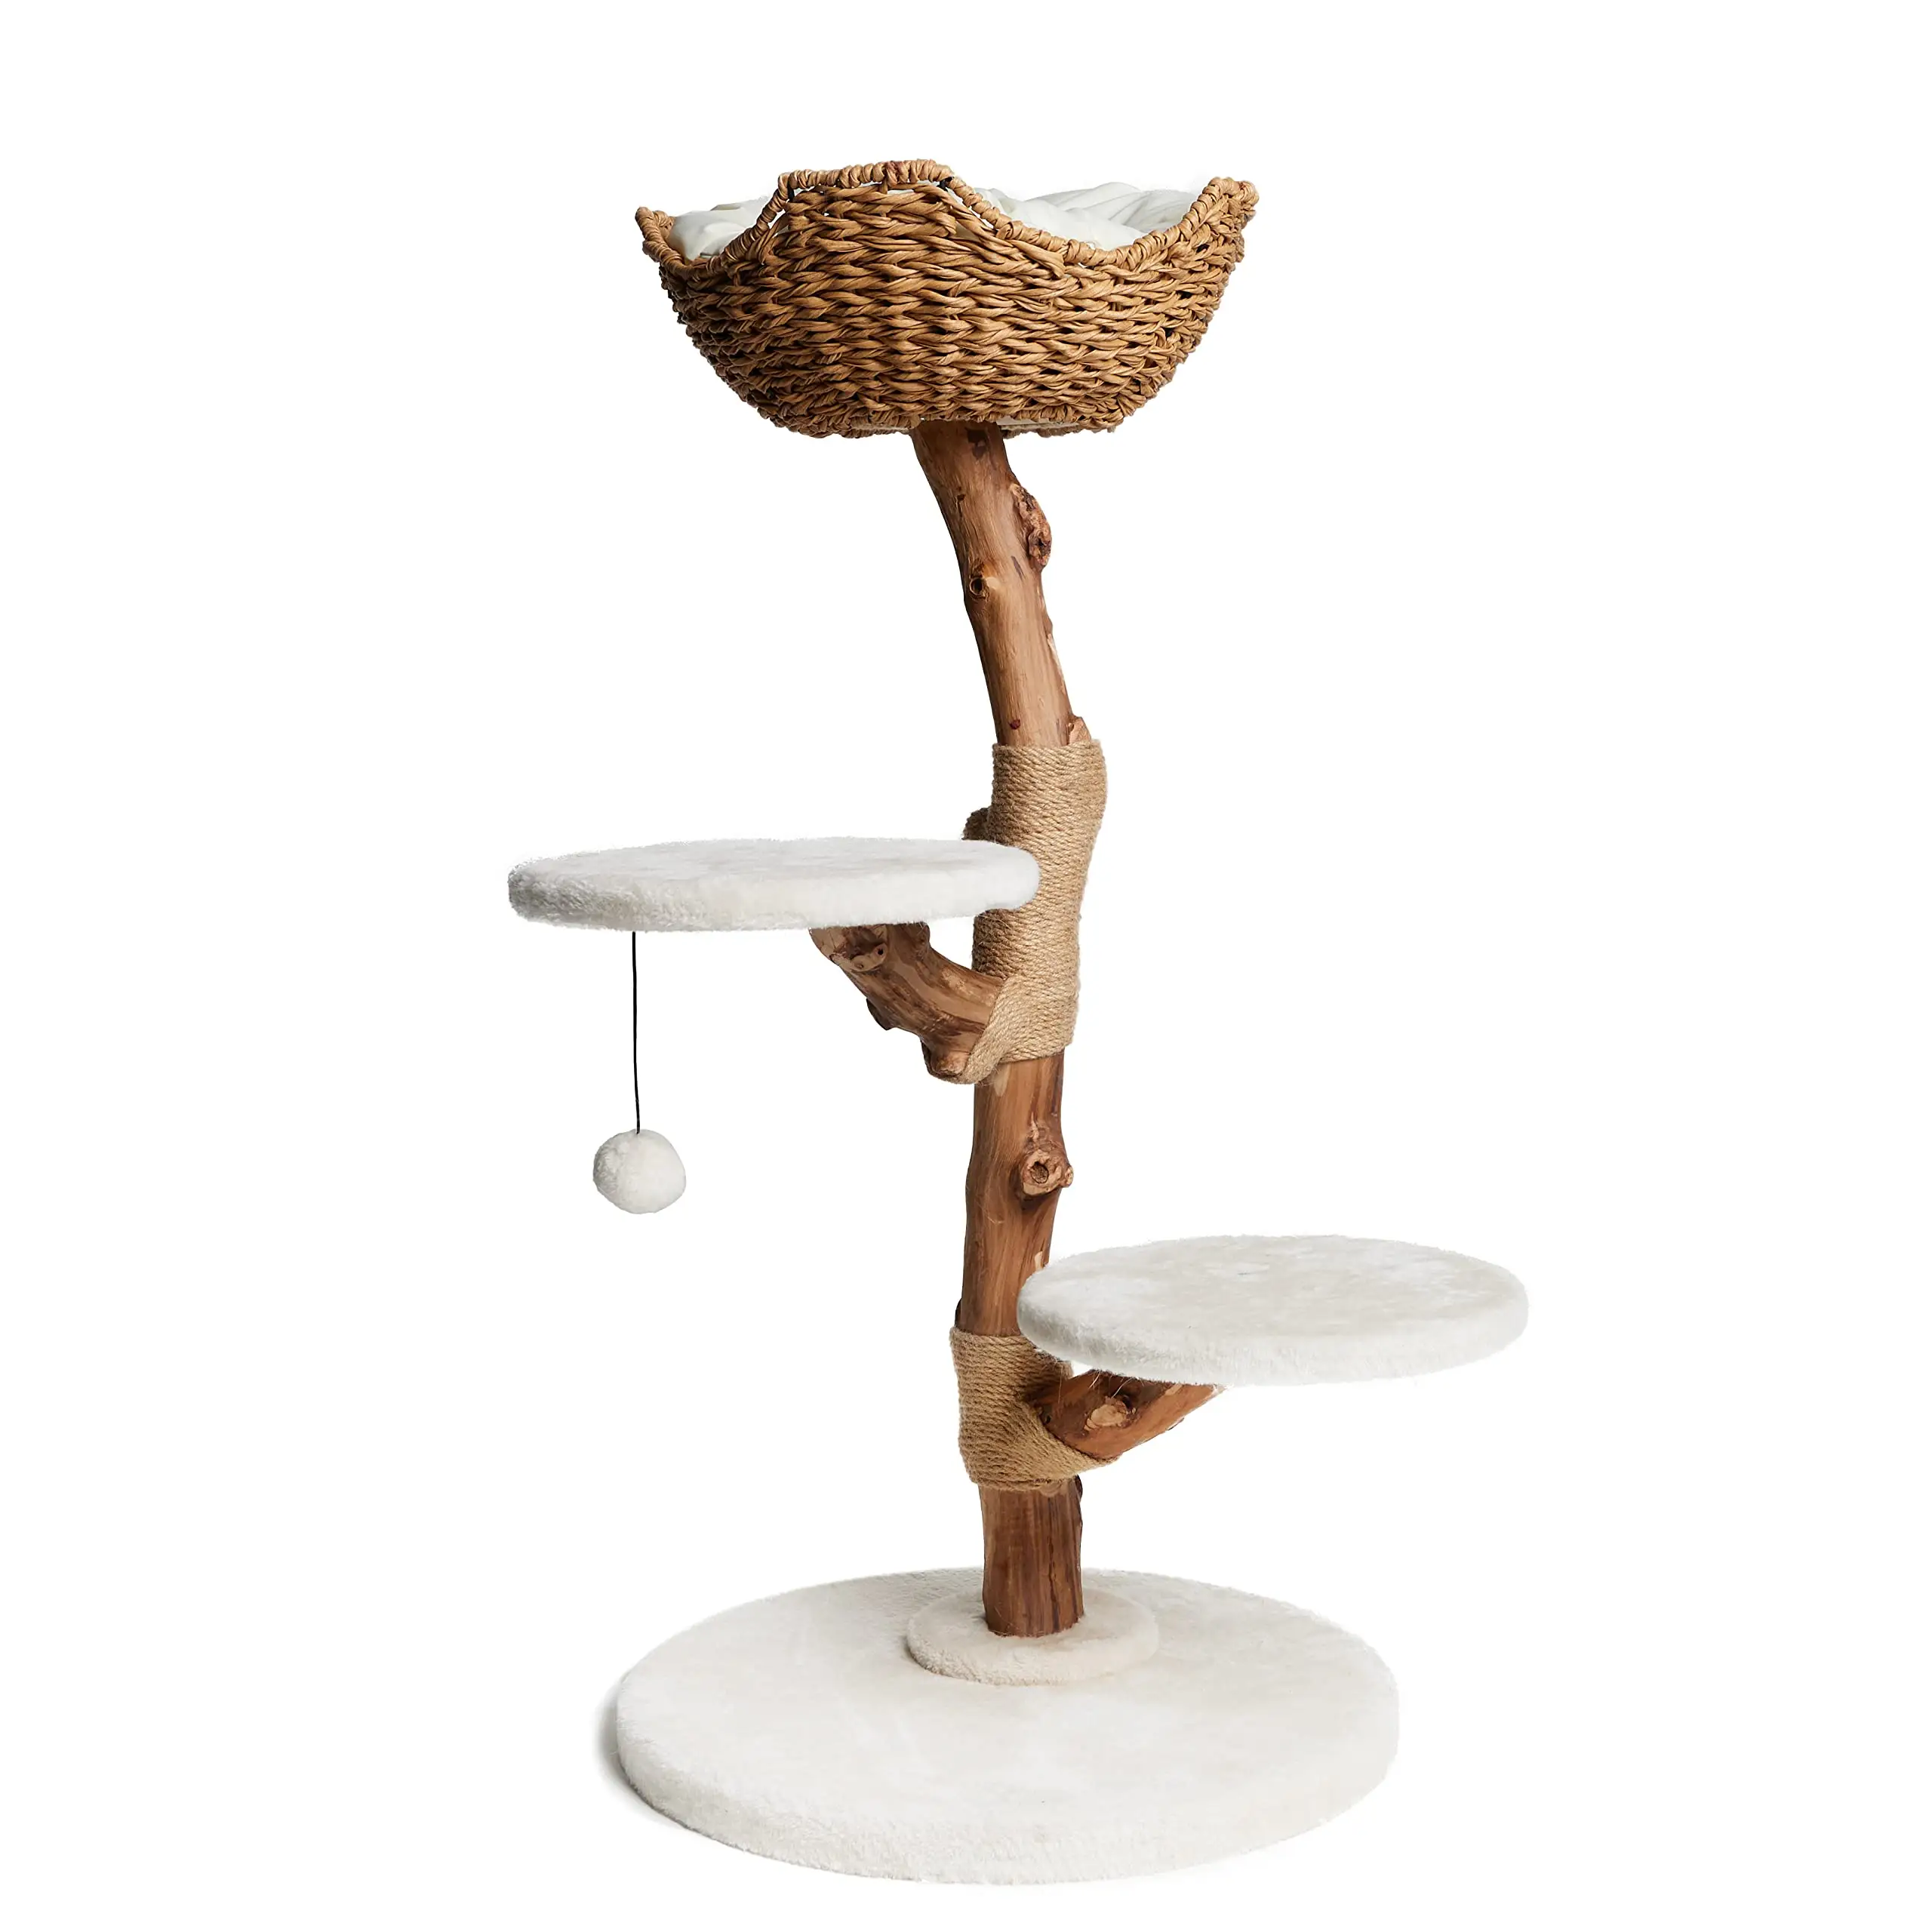 Hot selling Modern Cat Tree-Multi Level Natural Wood Cat Tower-Unique Design Easy Climb for Small and Old Cats